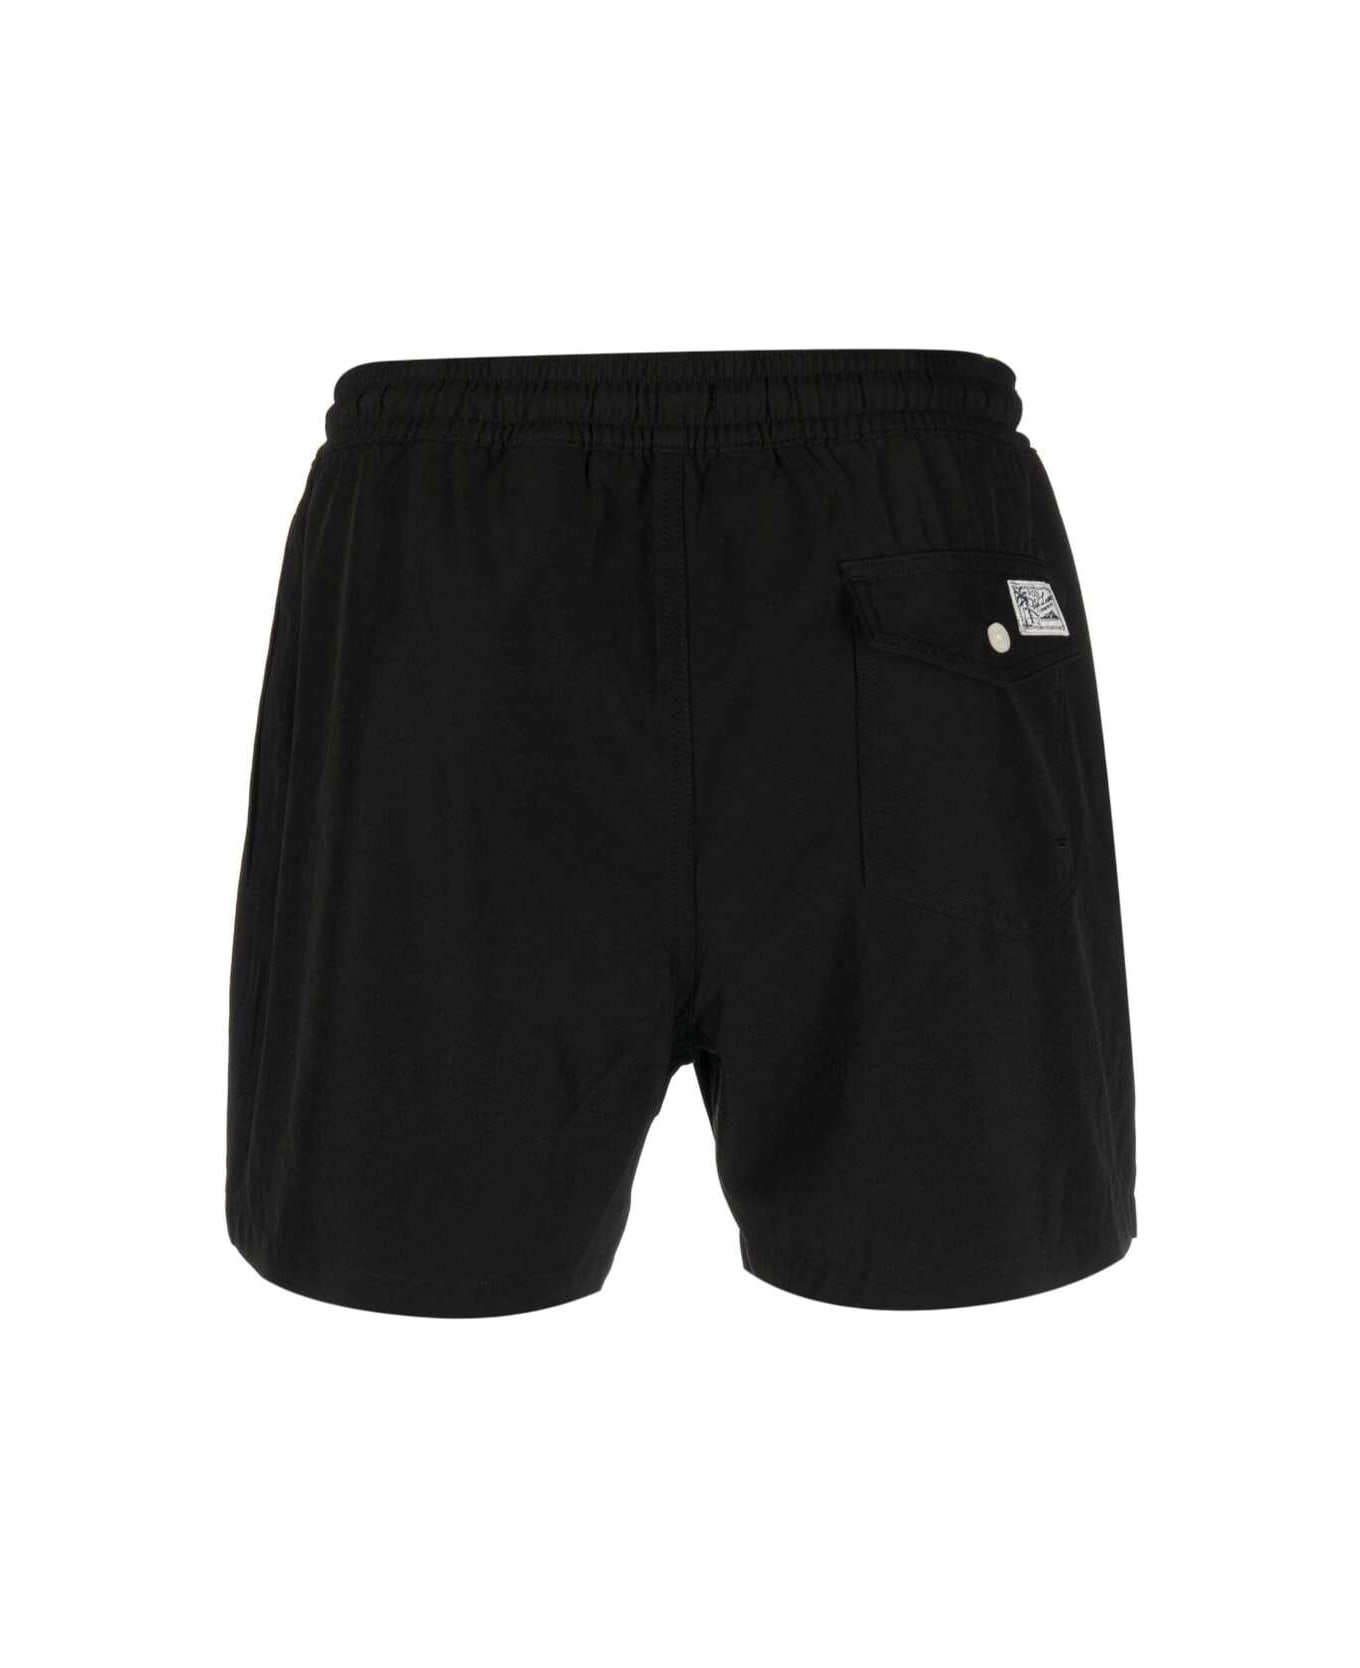 Ralph Lauren Black Swim Trunks With Embroidered Logo And Logo Patch In Nylon Man - BLACK